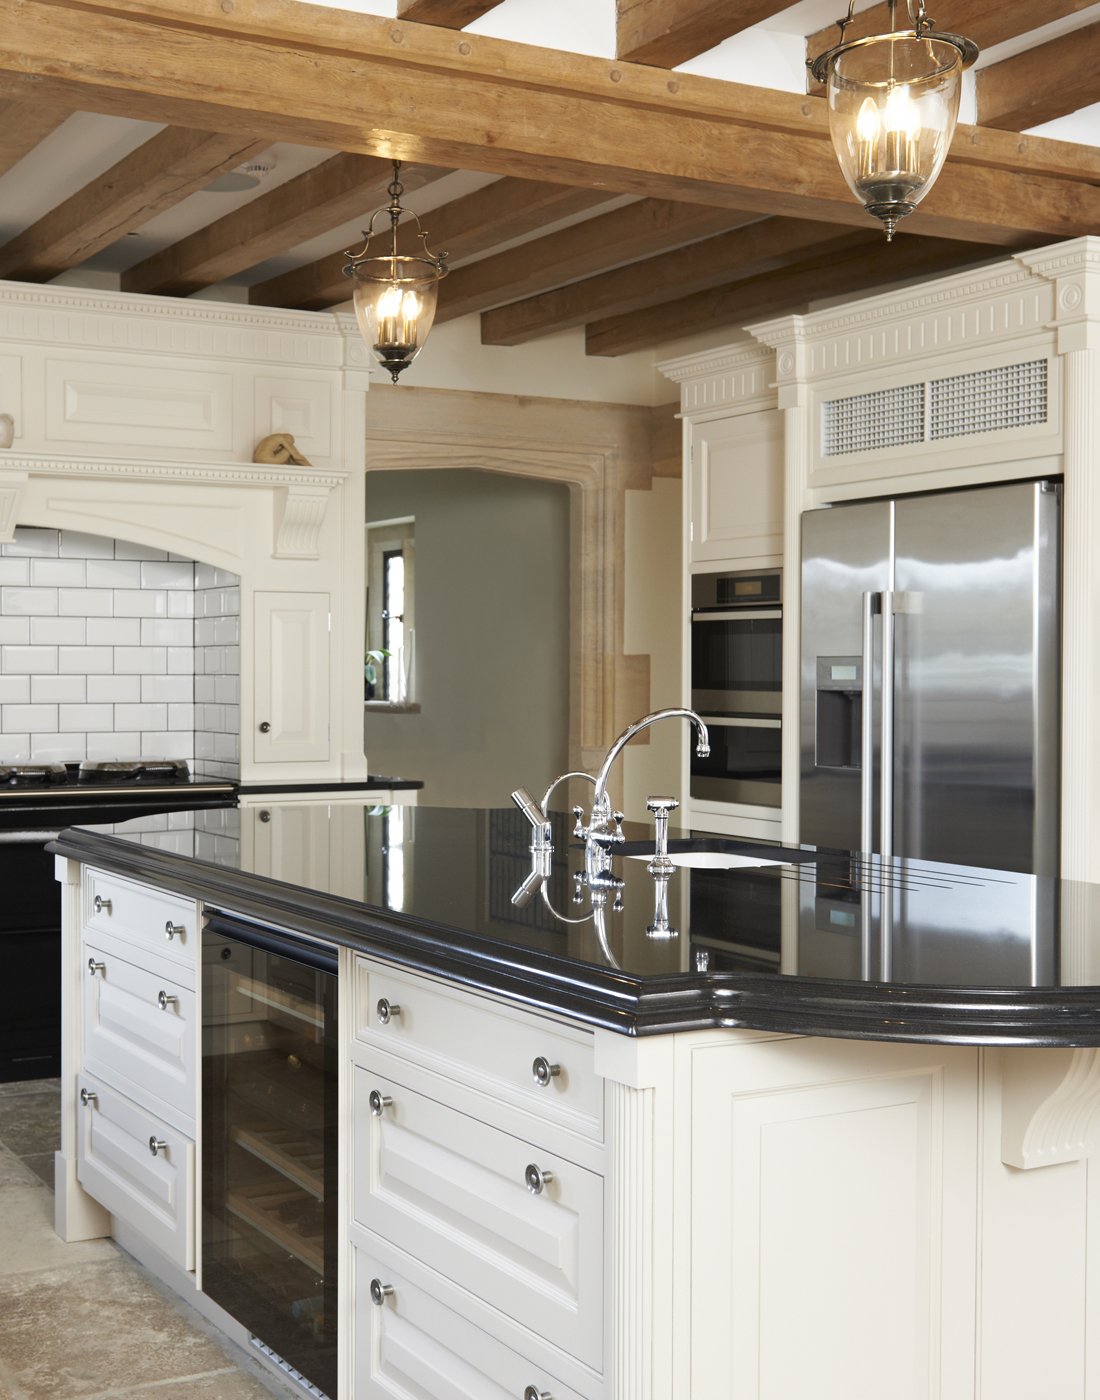 Kitchen and Bathroom Remodeling Services